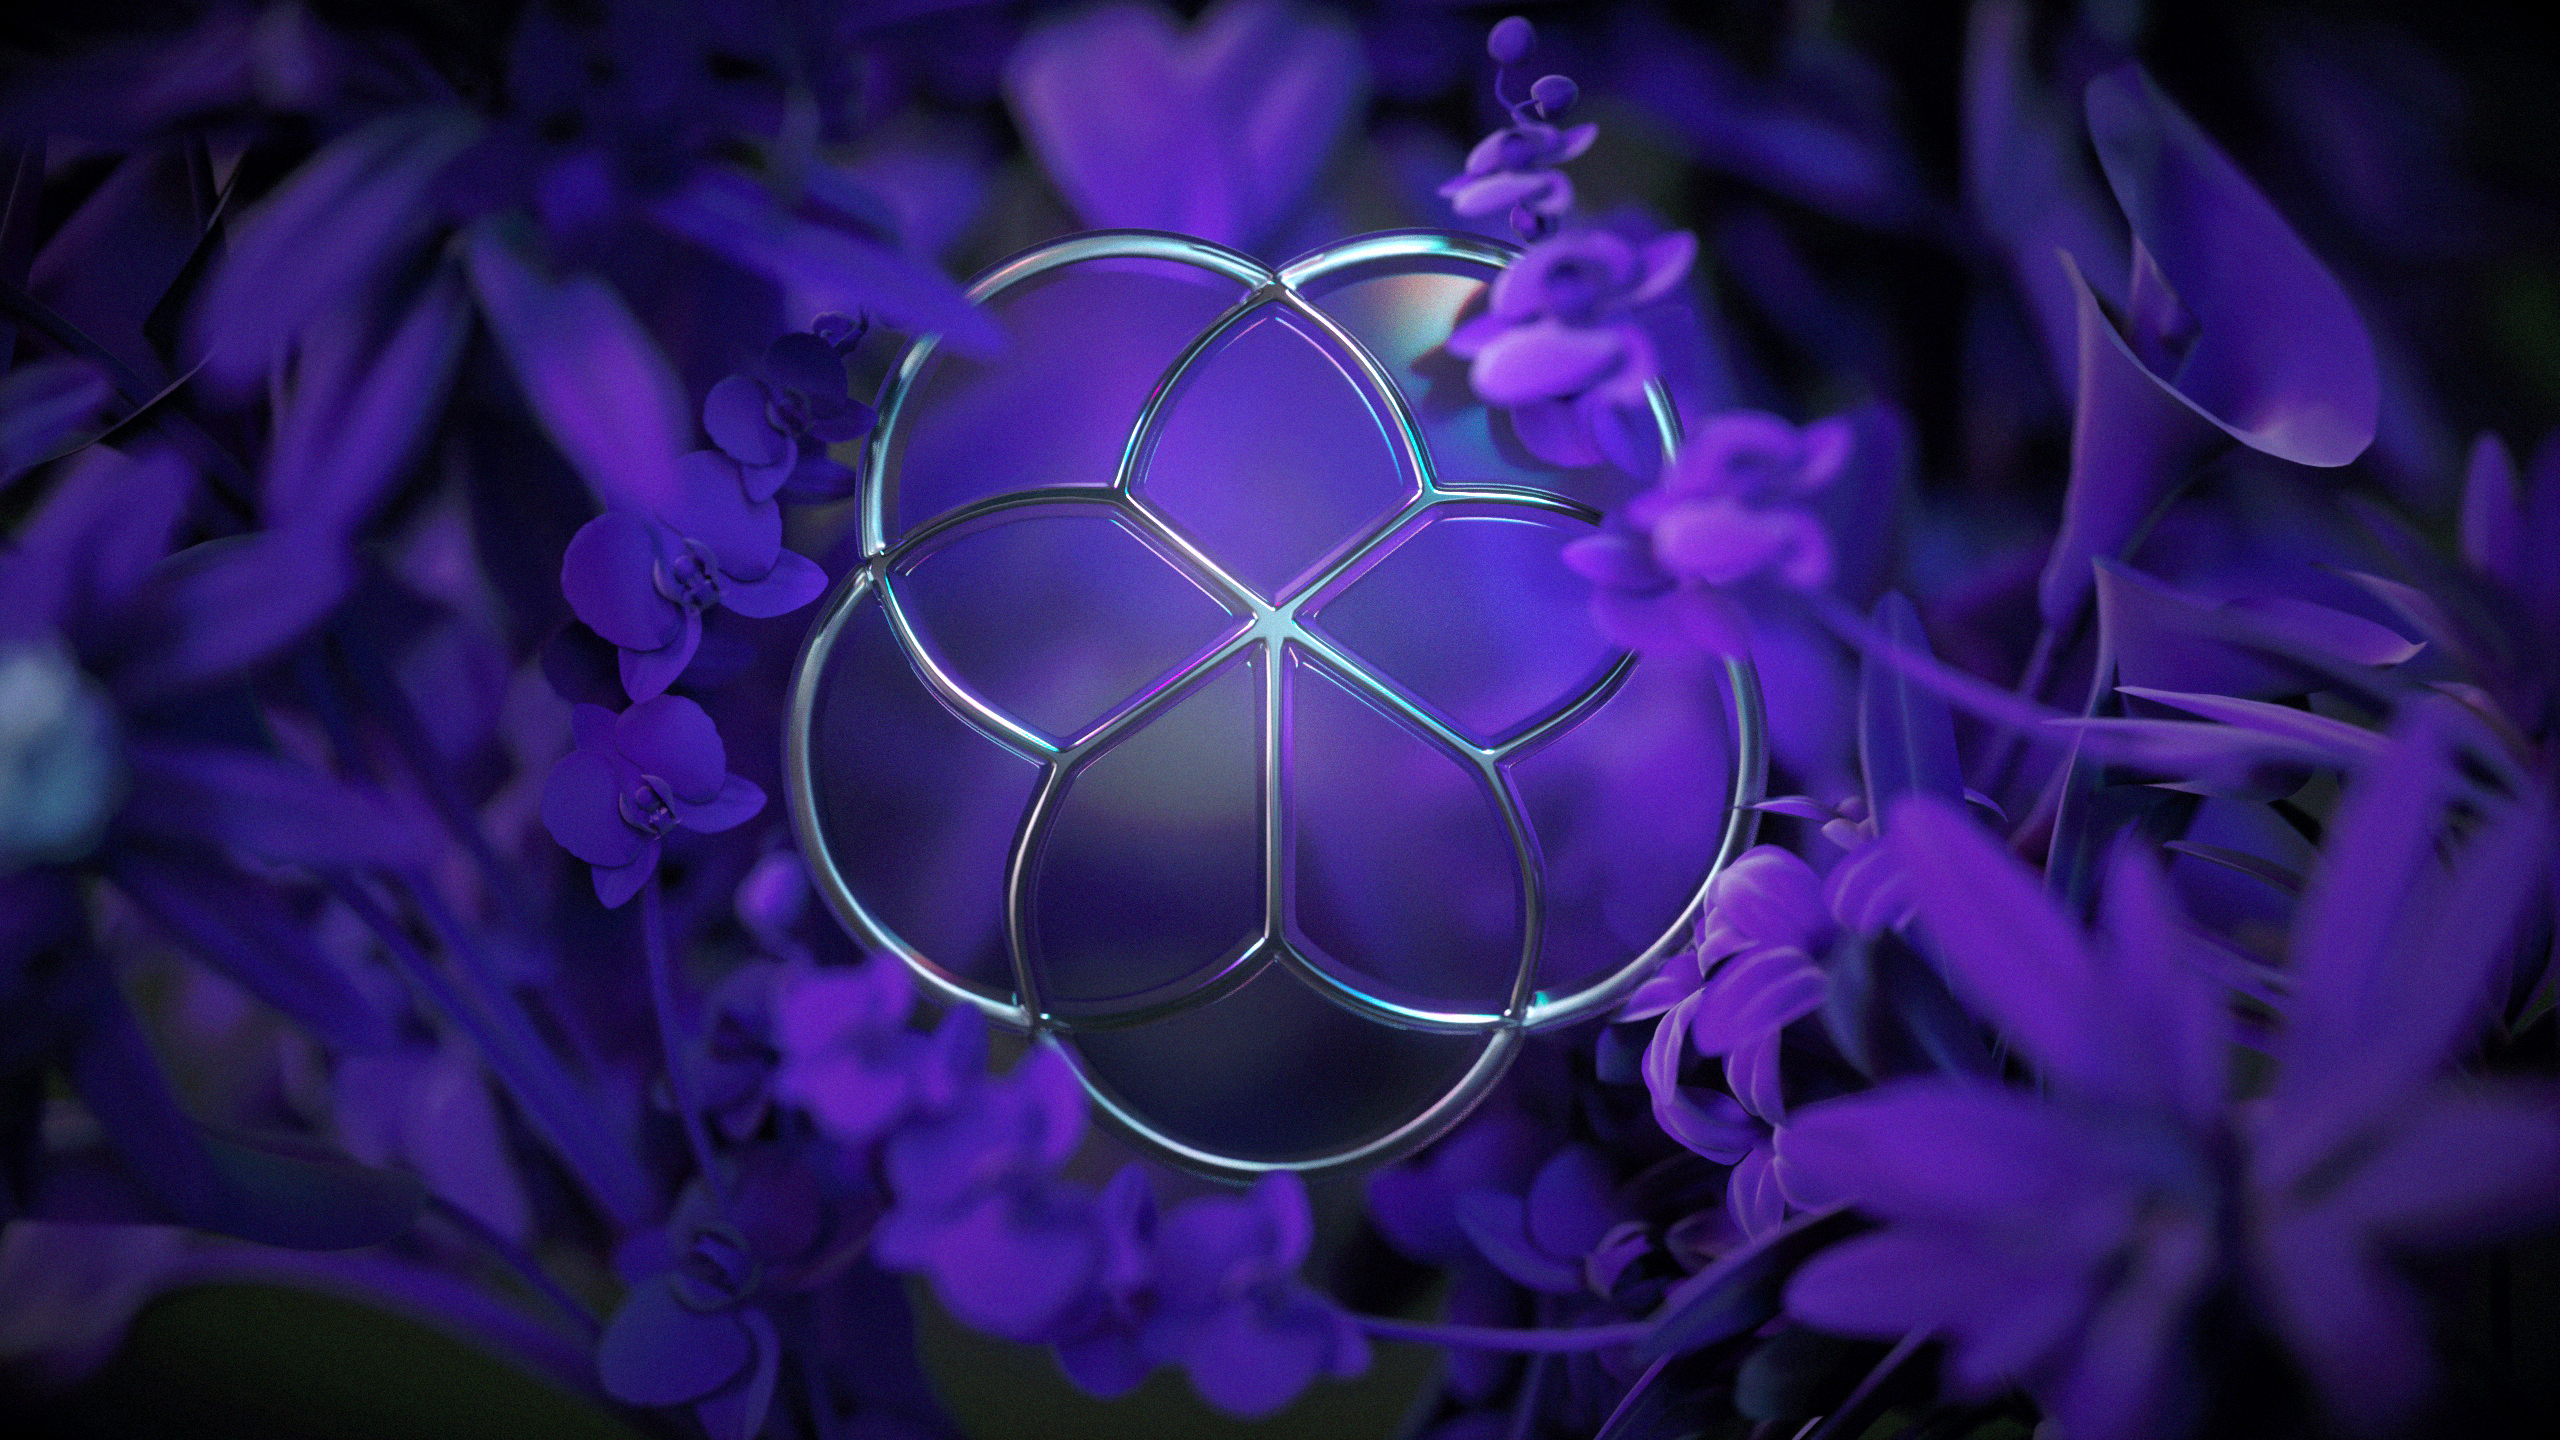 Wallpaper, abstract, flowers, leaves, orchids, purple, glowing 2560x1440